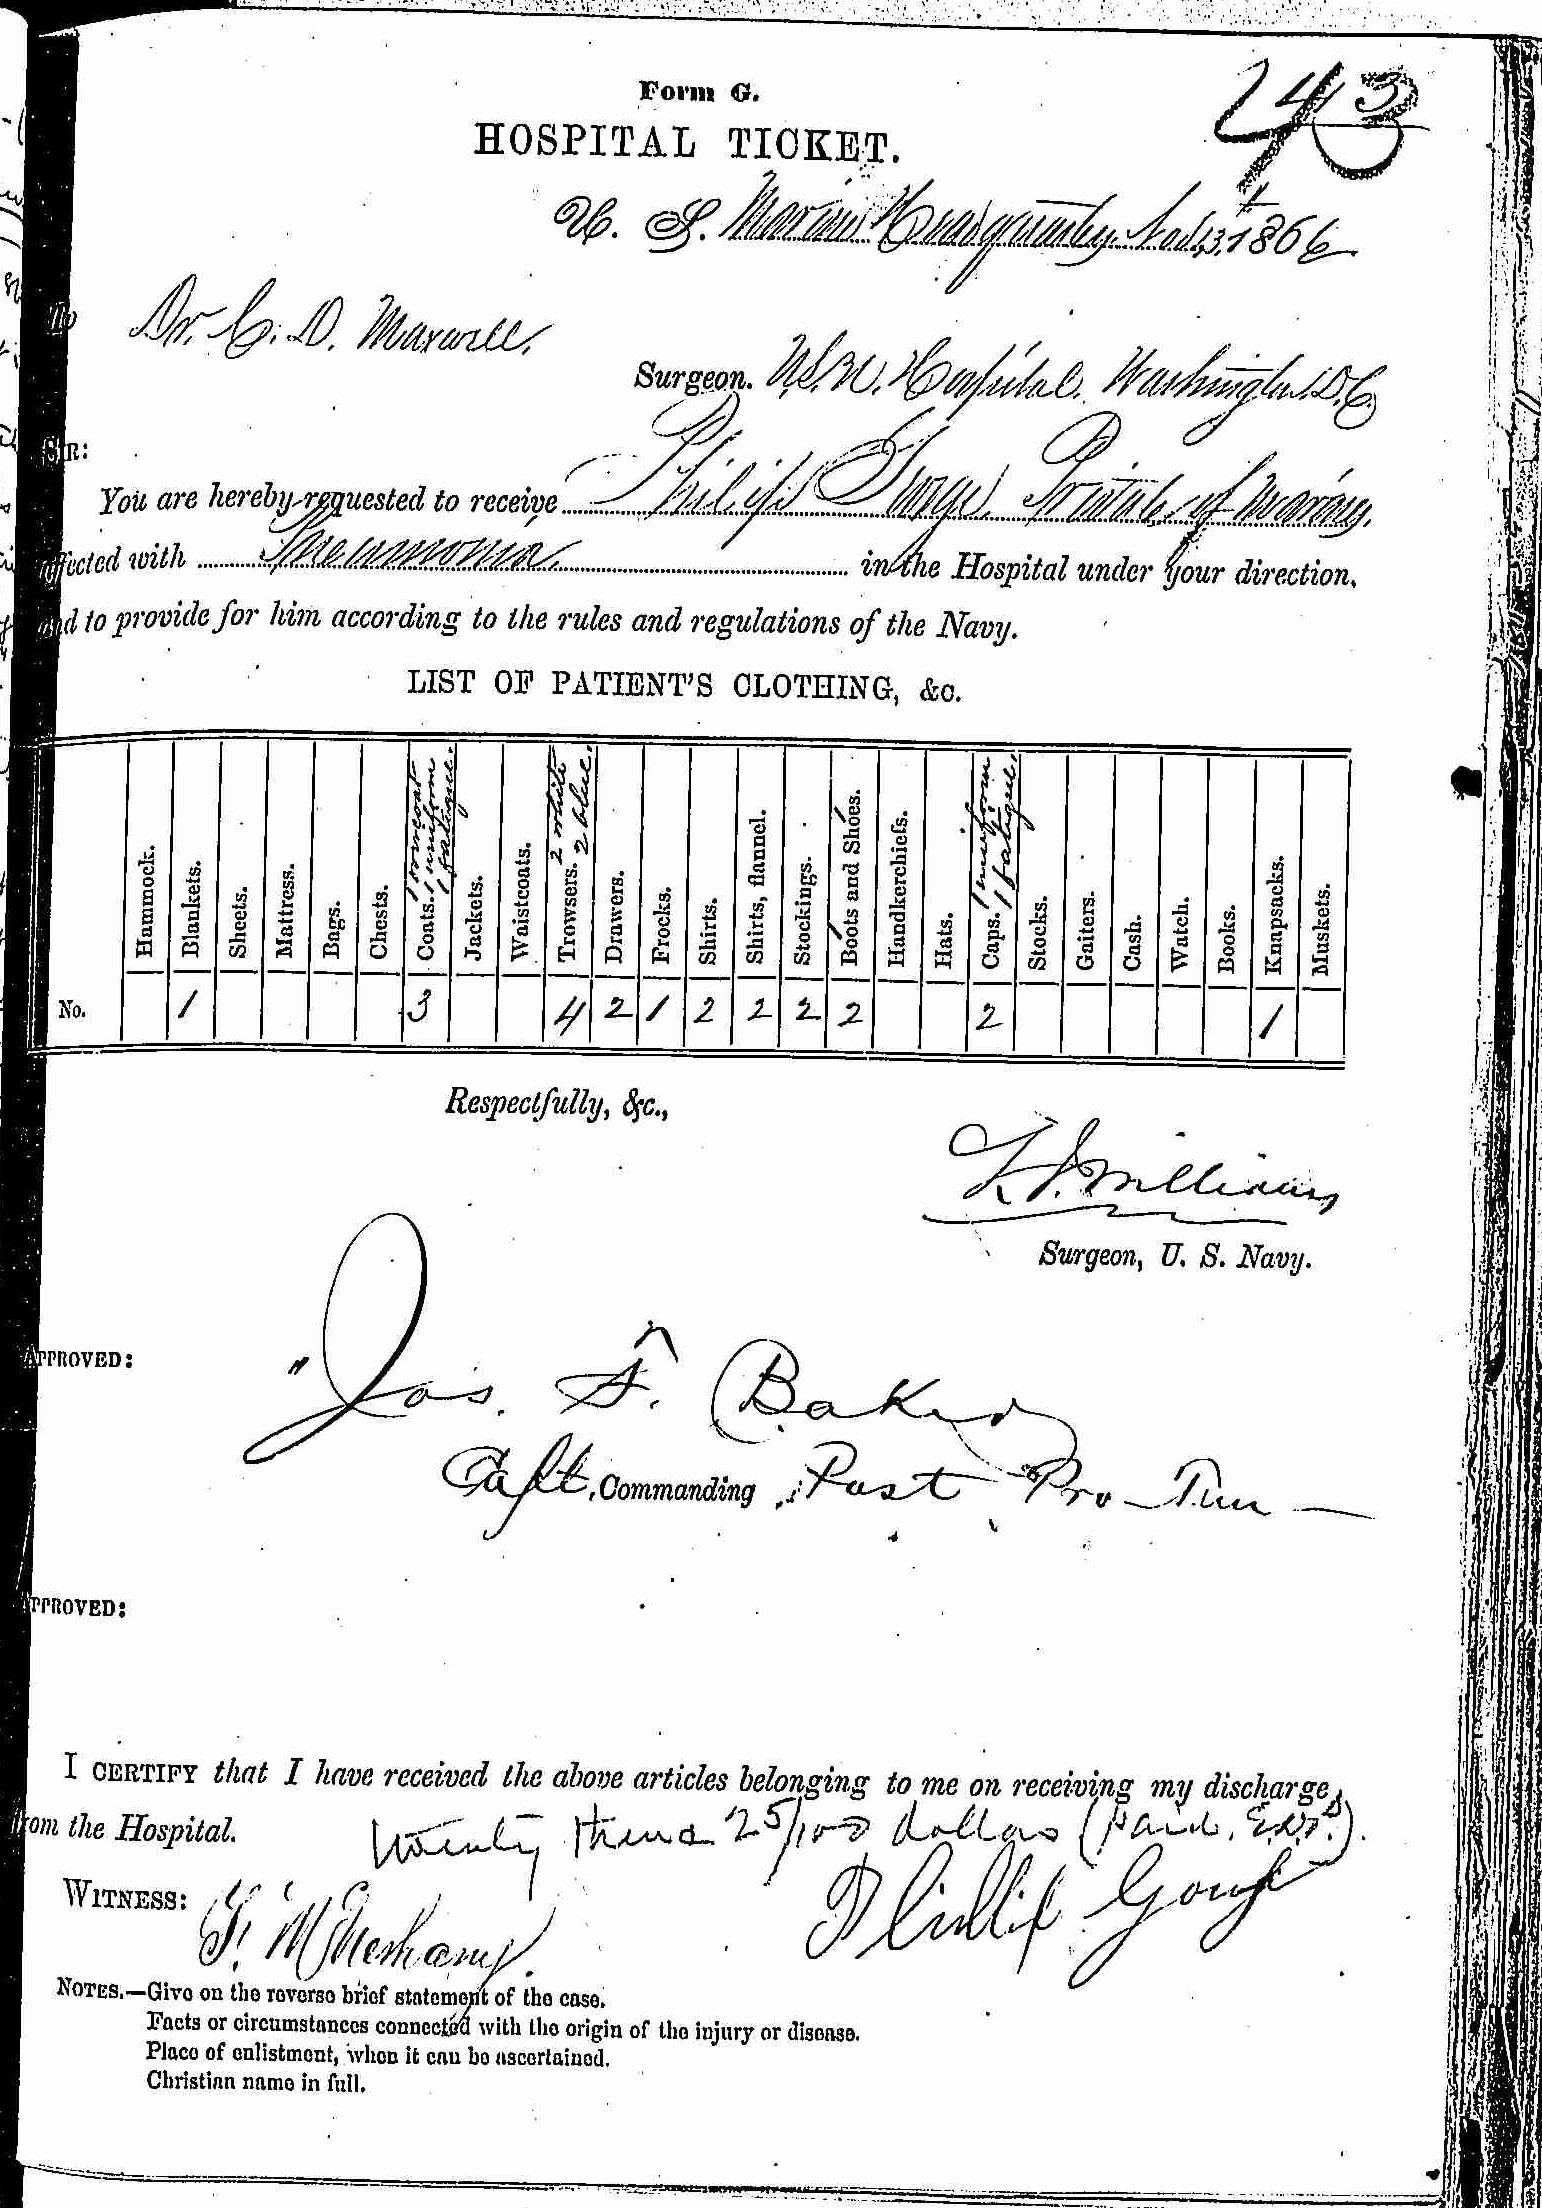 Entry for Philip George (first admission page 1 of 2) in the log Hospital Tickets and Case Papers - Naval Hospital - Washington, D.C. - 1865-68